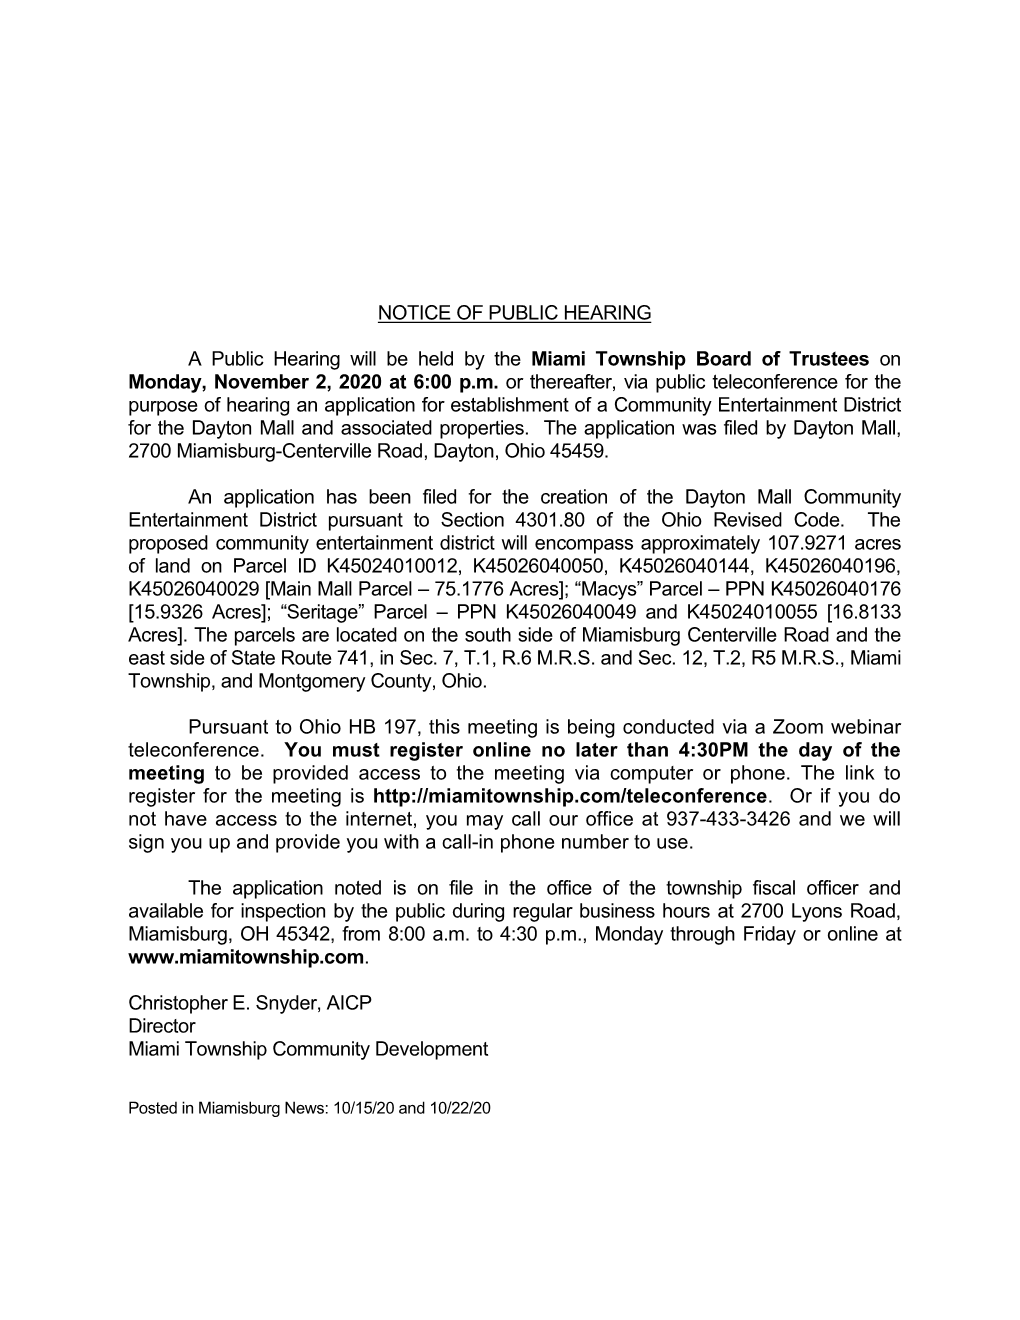 NOTICE of PUBLIC HEARING a Public Hearing Will Be Held by The